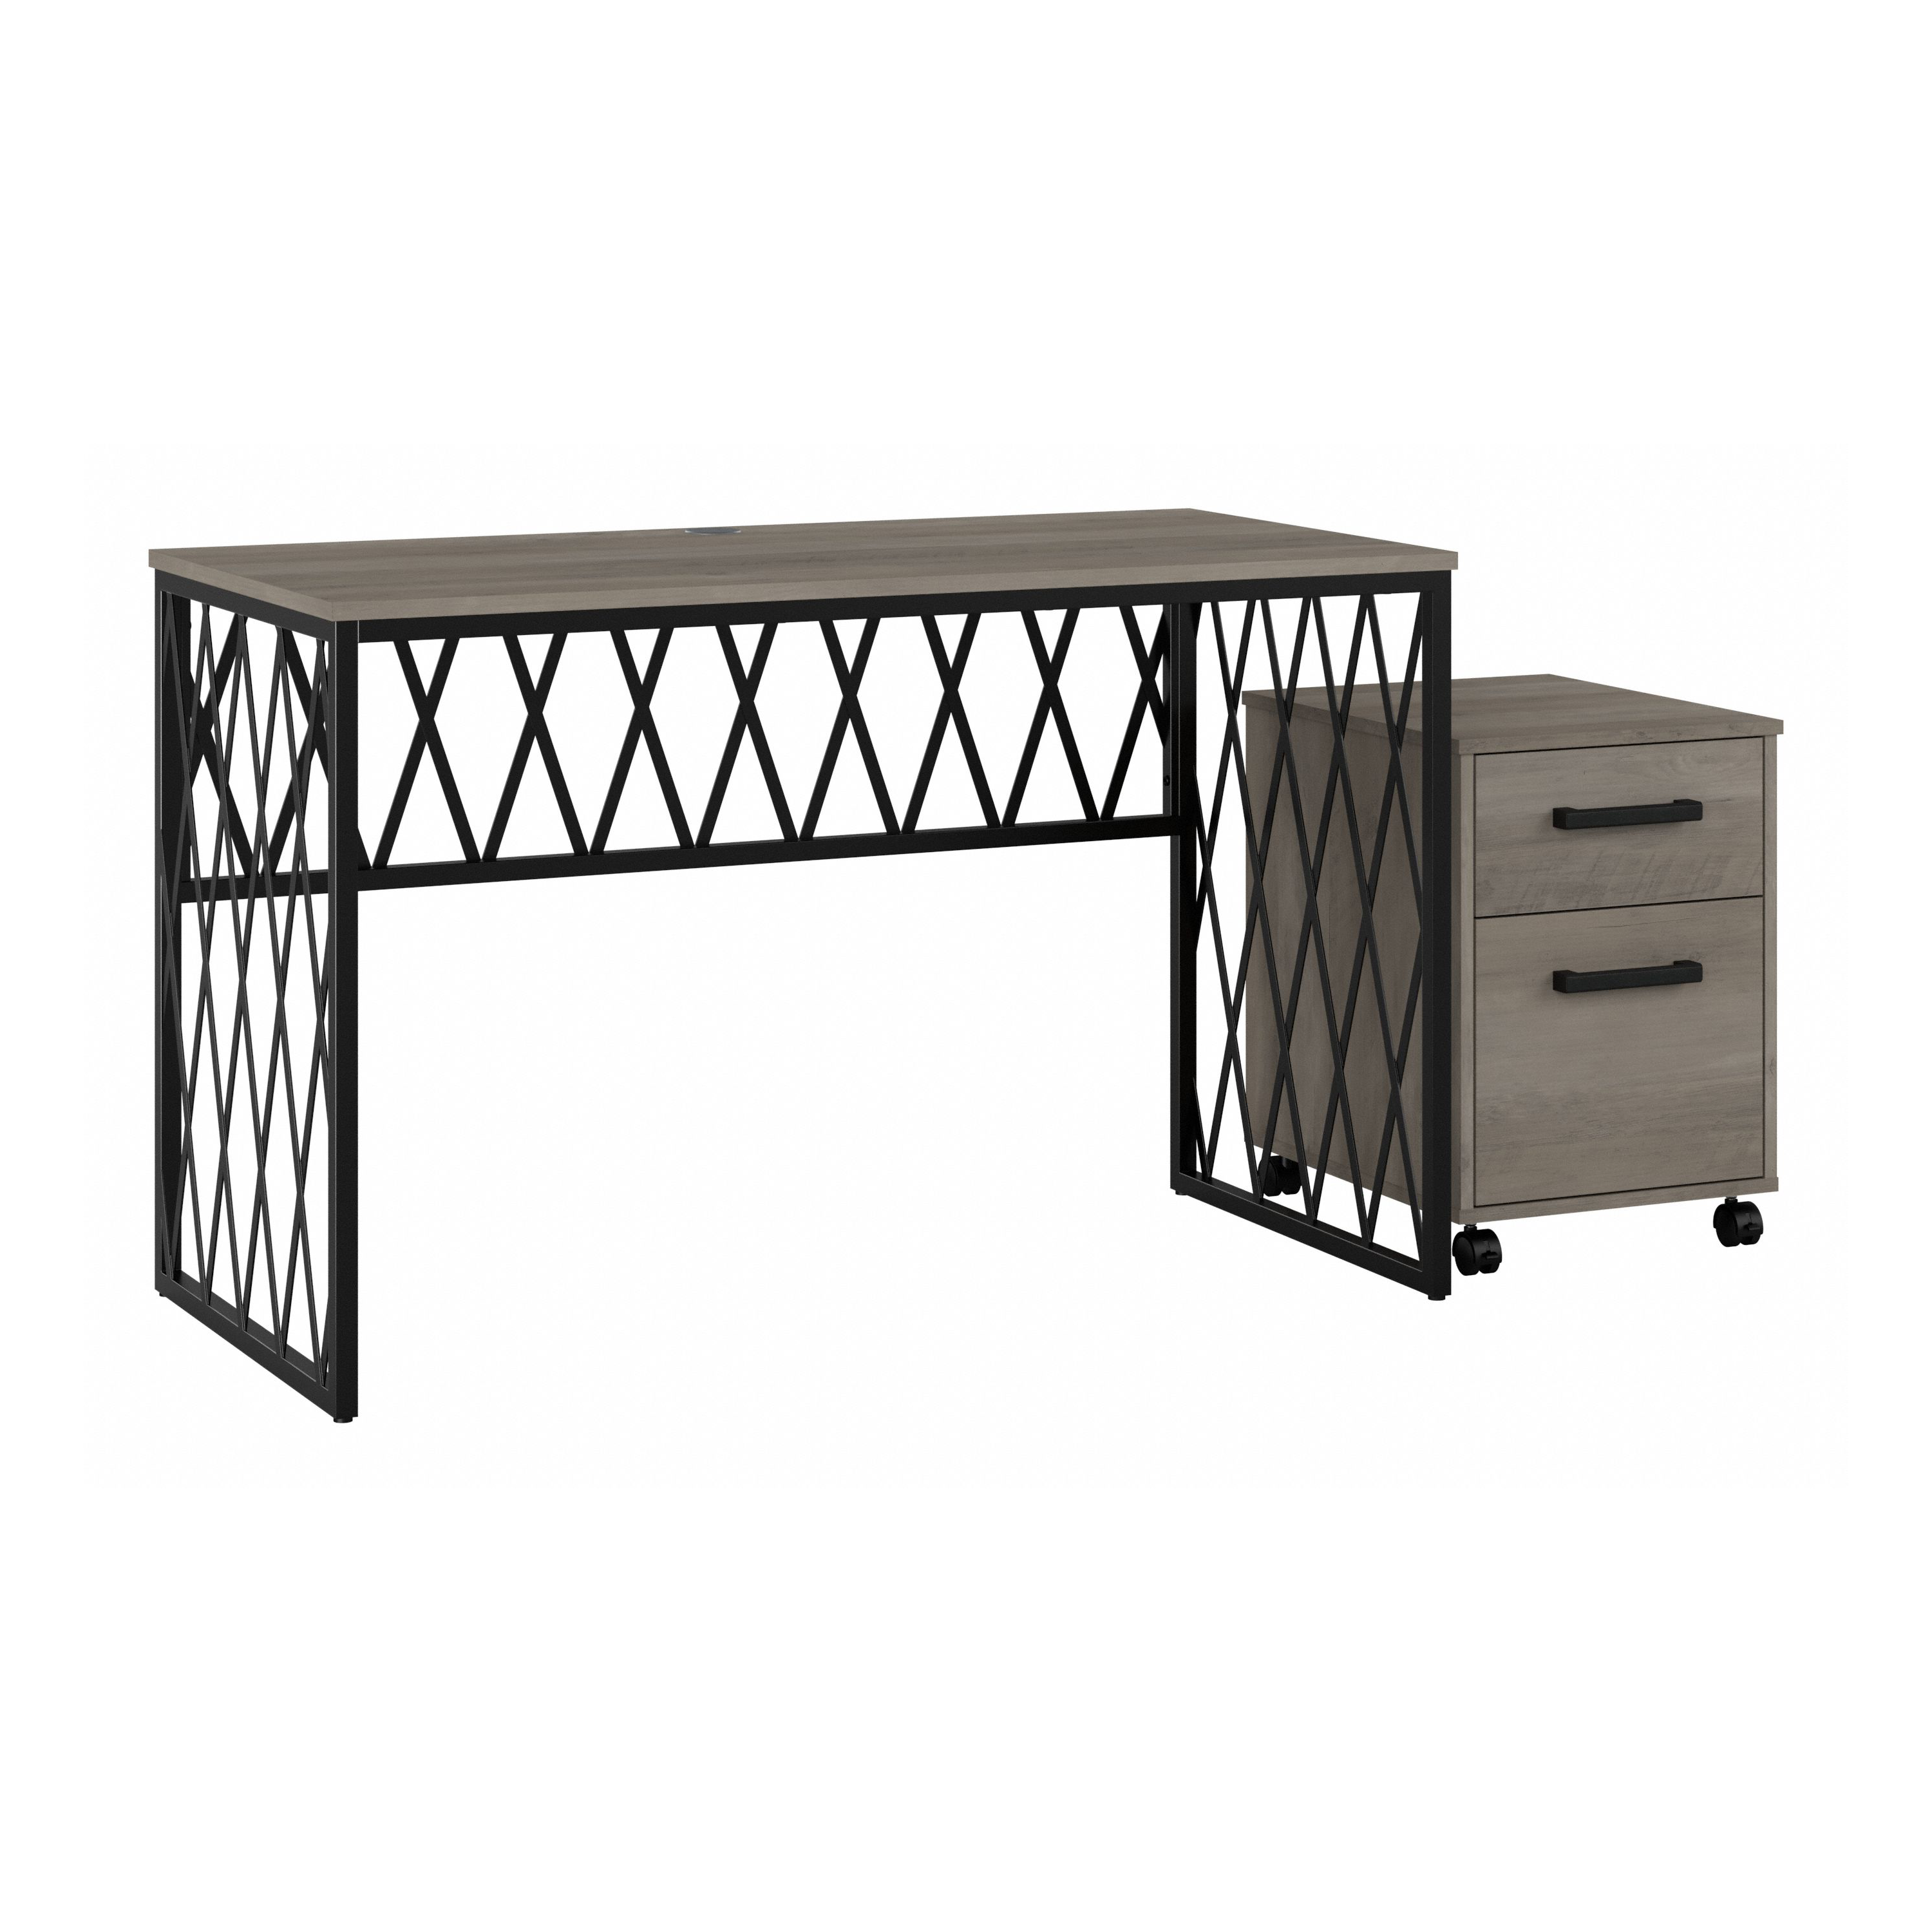 Shop Bush Furniture City Park 48W Industrial Writing Desk with Mobile File Cabinet 02 CPK003DG #color_driftwood gray